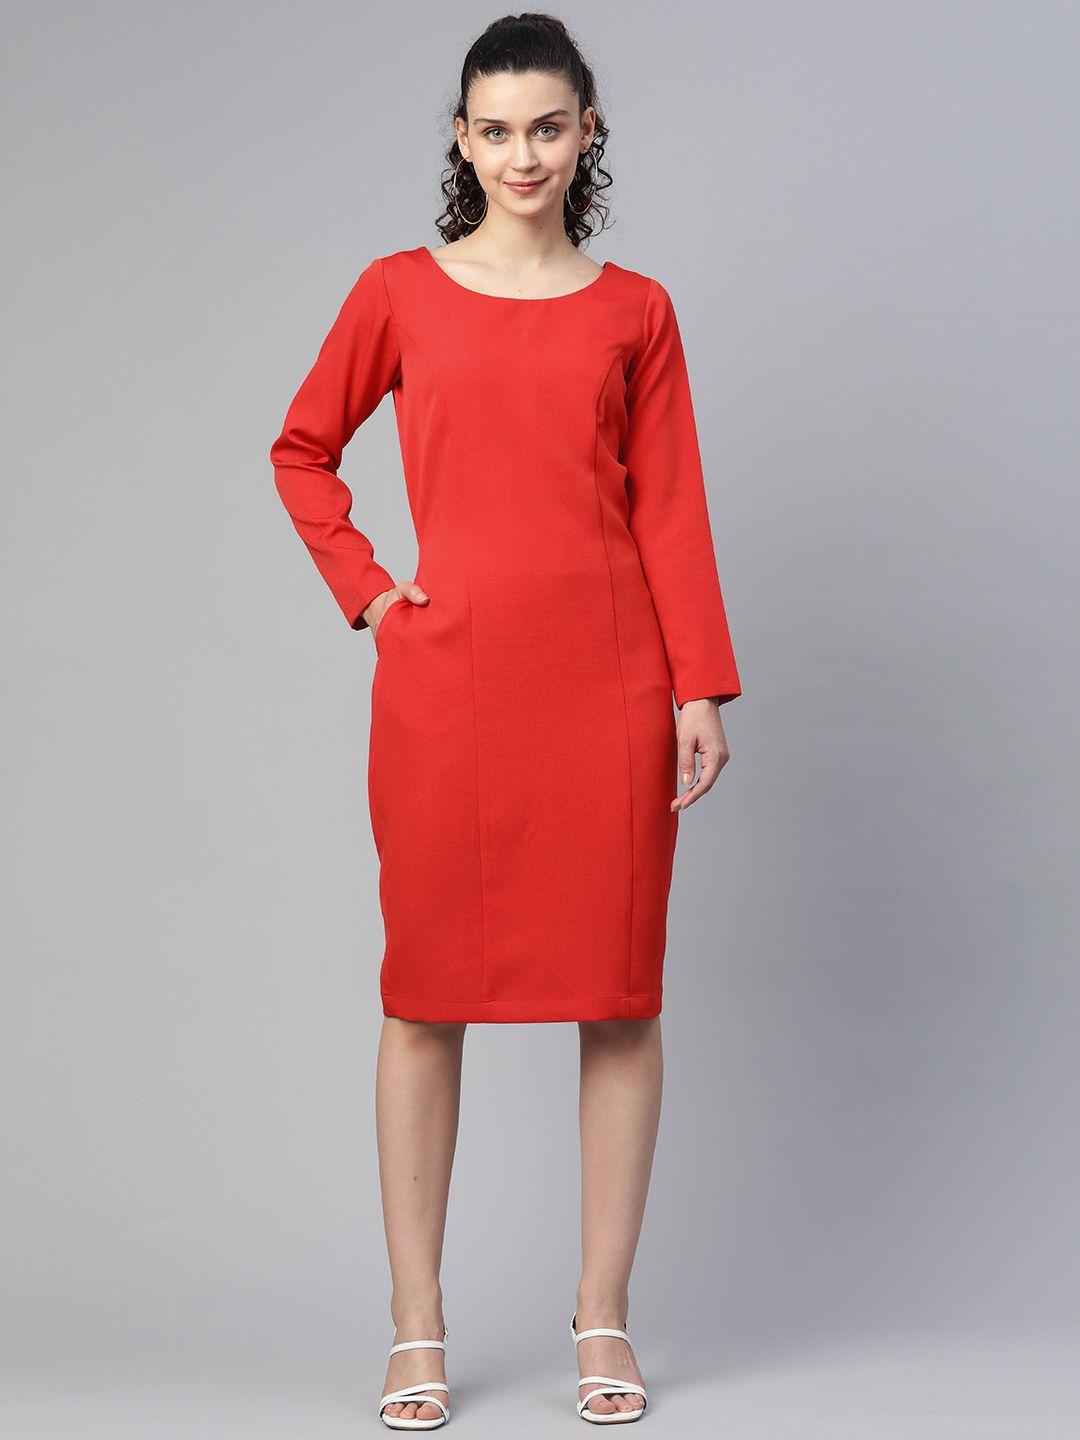 powersutra red solid sheath dress